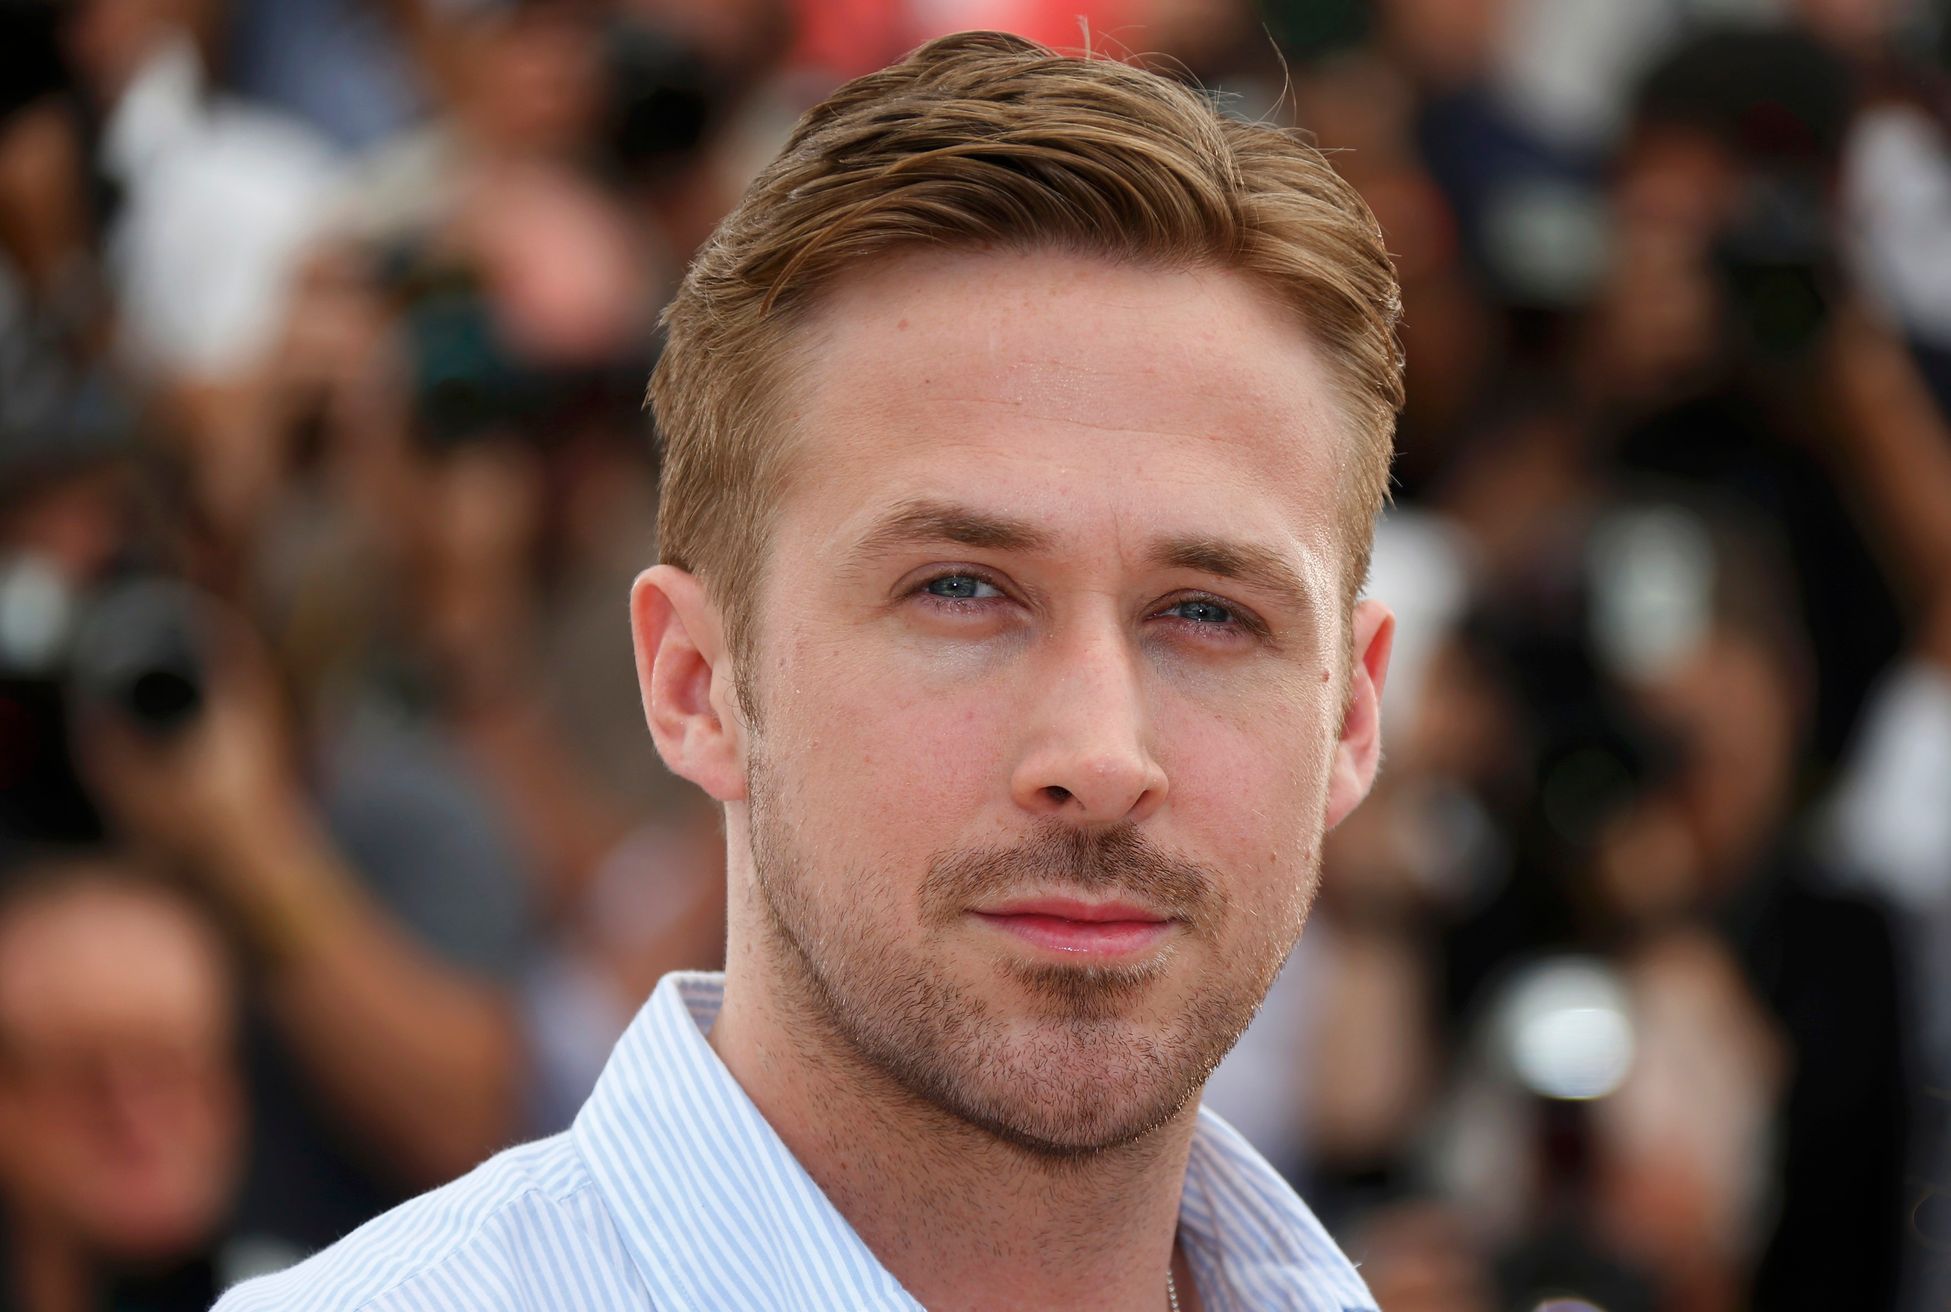 Director Ryan Gosling poses during a photocall for the film &quot;Lost River&quot; in competition for the category &quot;Un Certain Regard&quot; at the 67th Cannes Film Festival in Cannes